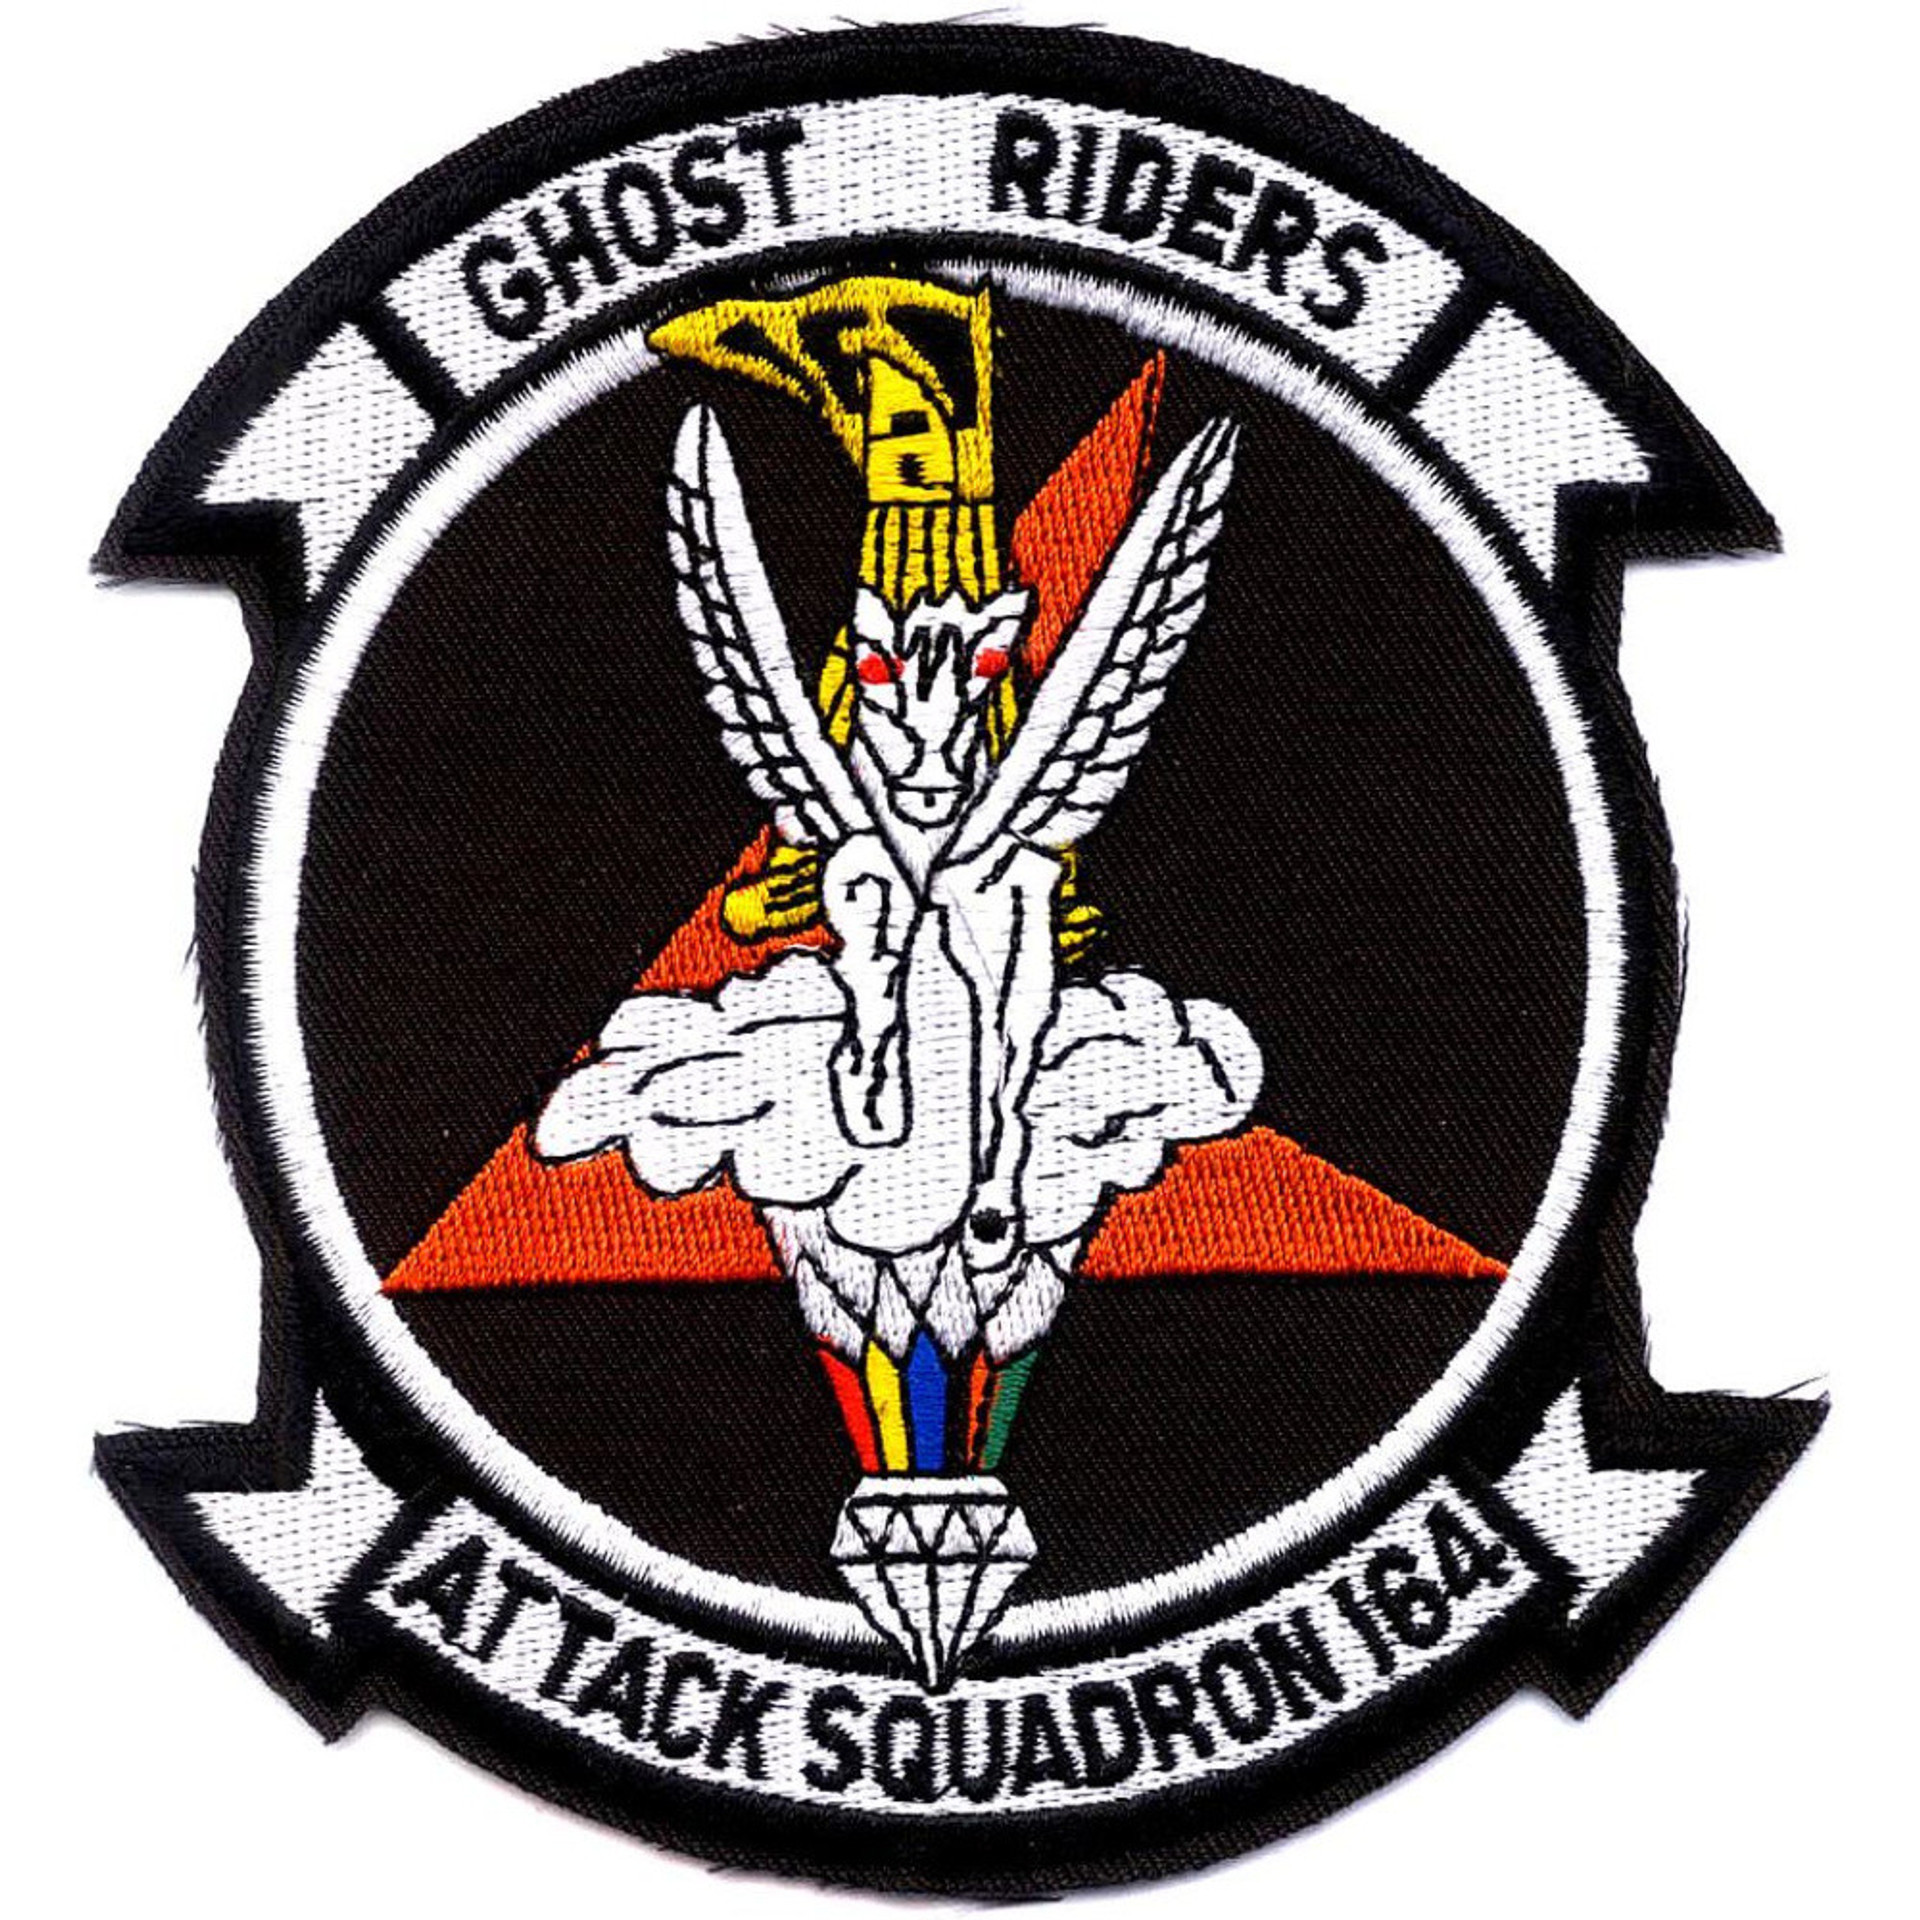 VA-52 Patch Knight Riders | Squadron Patches | Navy Patches | Popular Patch